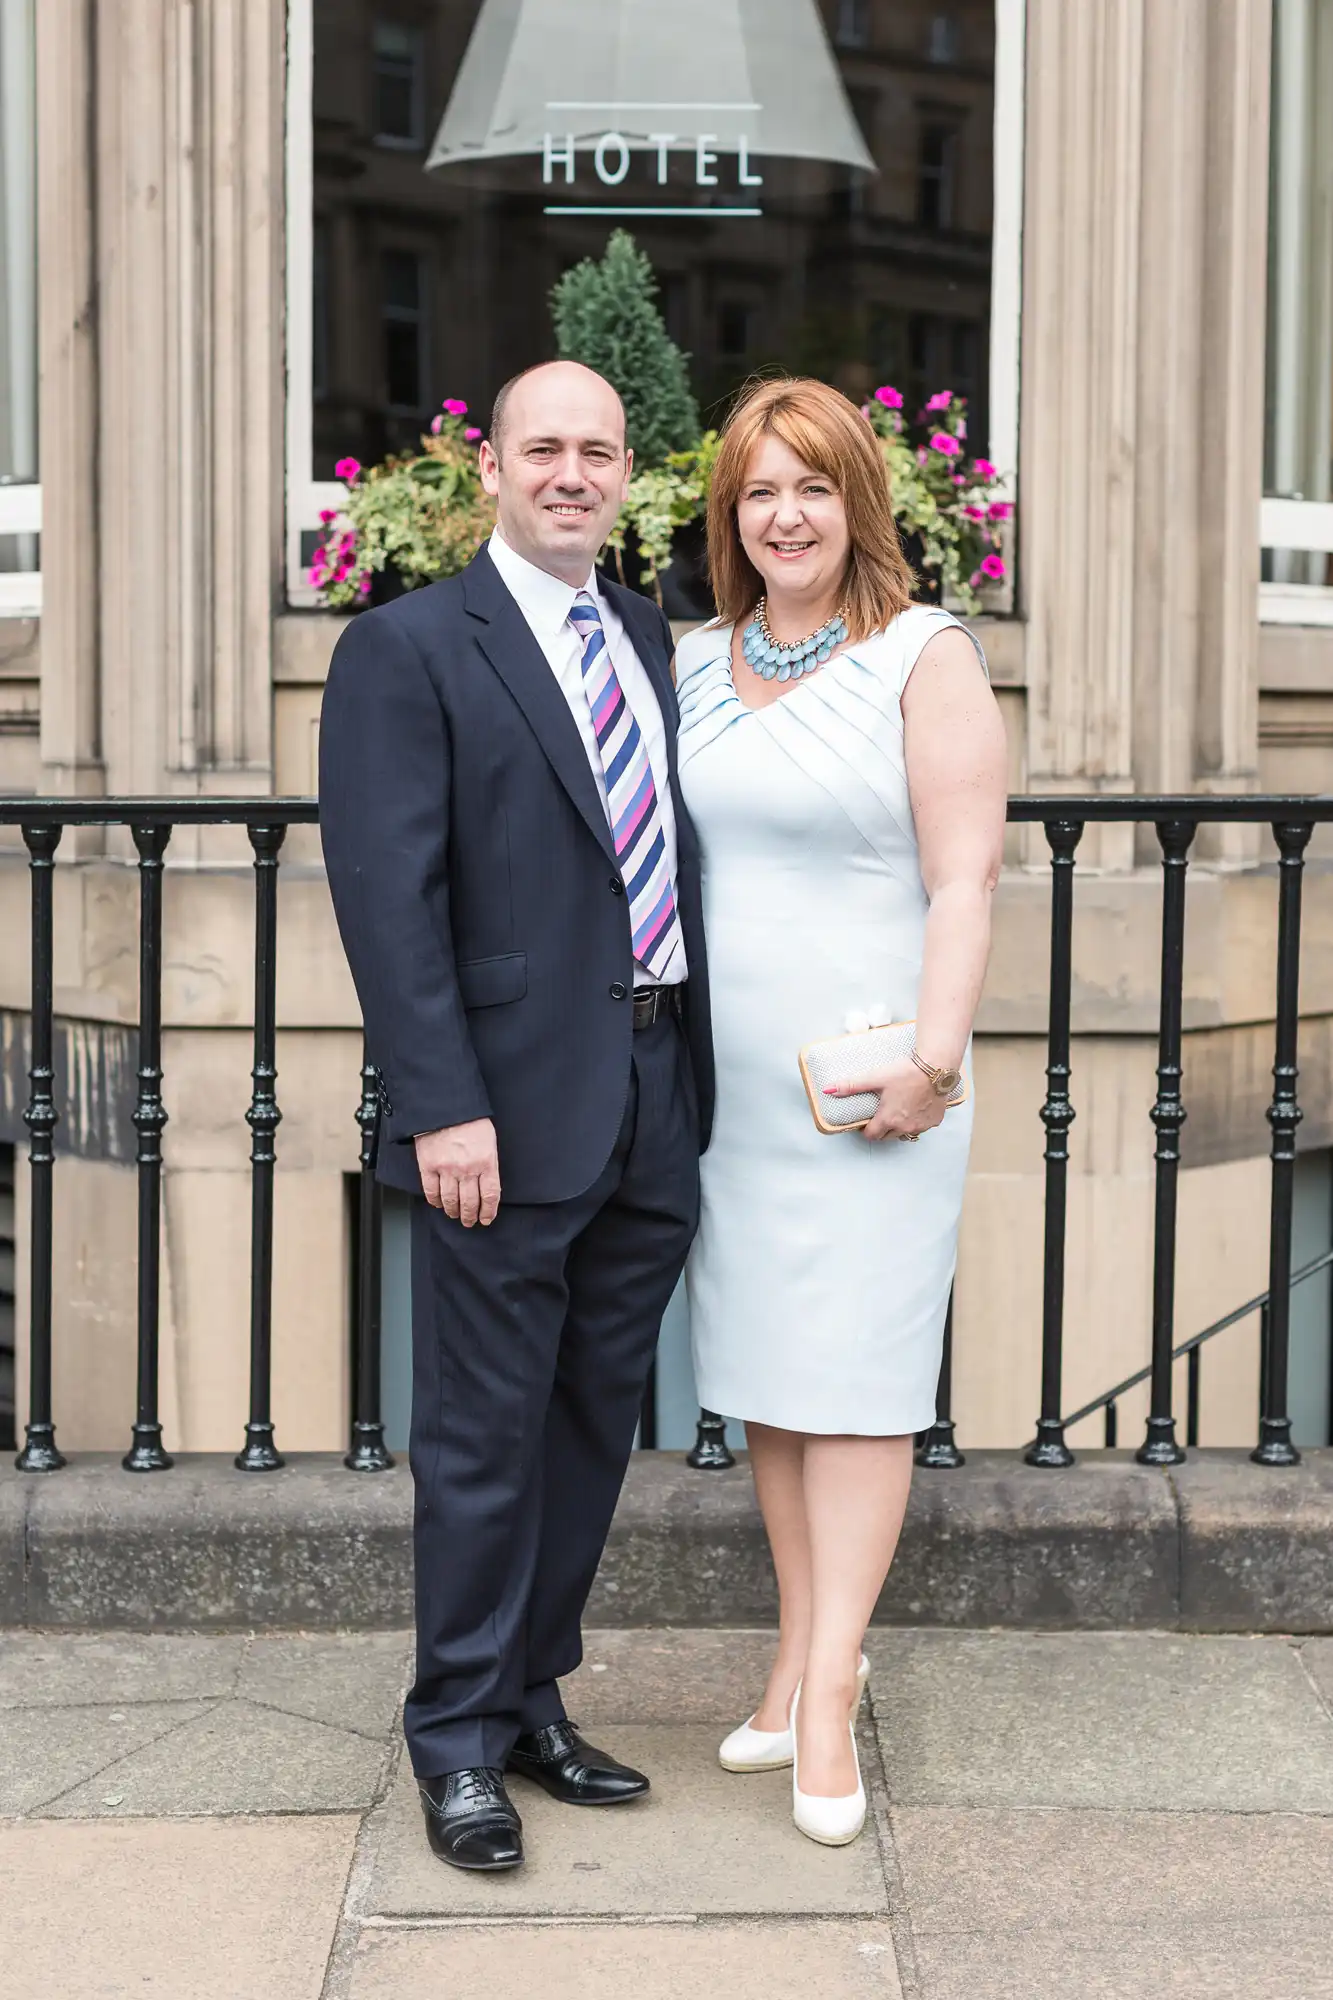 A man and a woman dressed in formal attire standing in front of a hotel entrance with floral decorations.